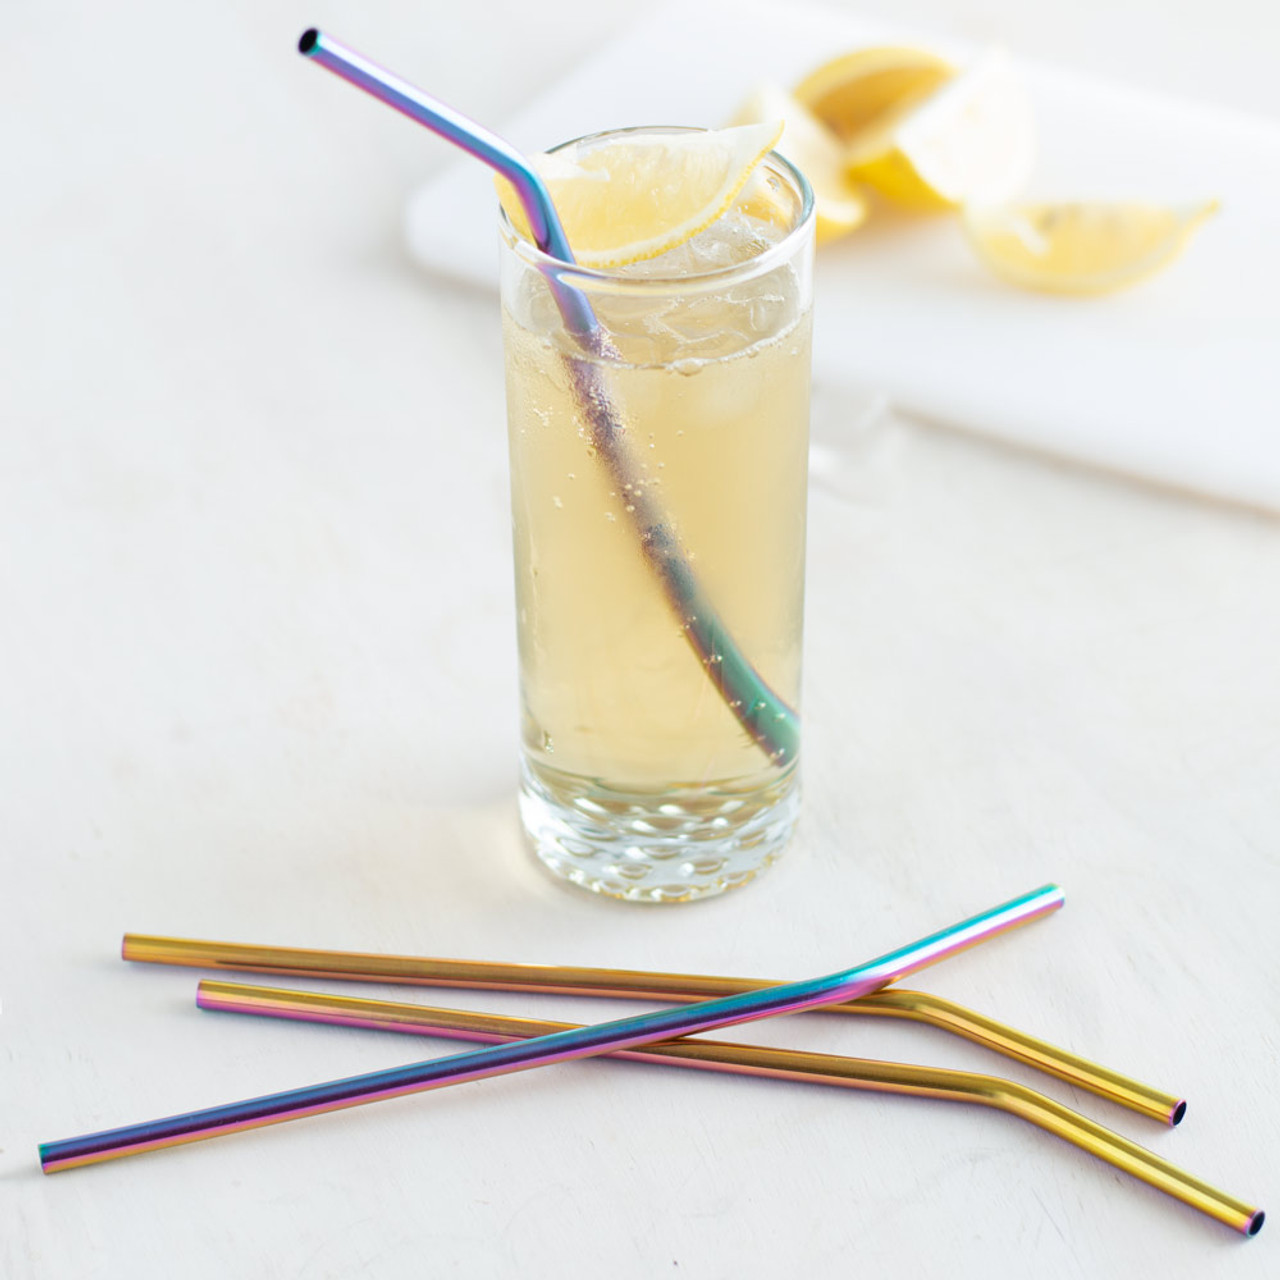 https://cdn11.bigcommerce.com/s-cznxq08r7/images/stencil/1280x1280/products/519/8396/rainbow-straw-set-4_845033088713_behind_the_bar_stainless_steel_drinking_straw_4_rainbow_07__90687.1590771946.jpg?c=1